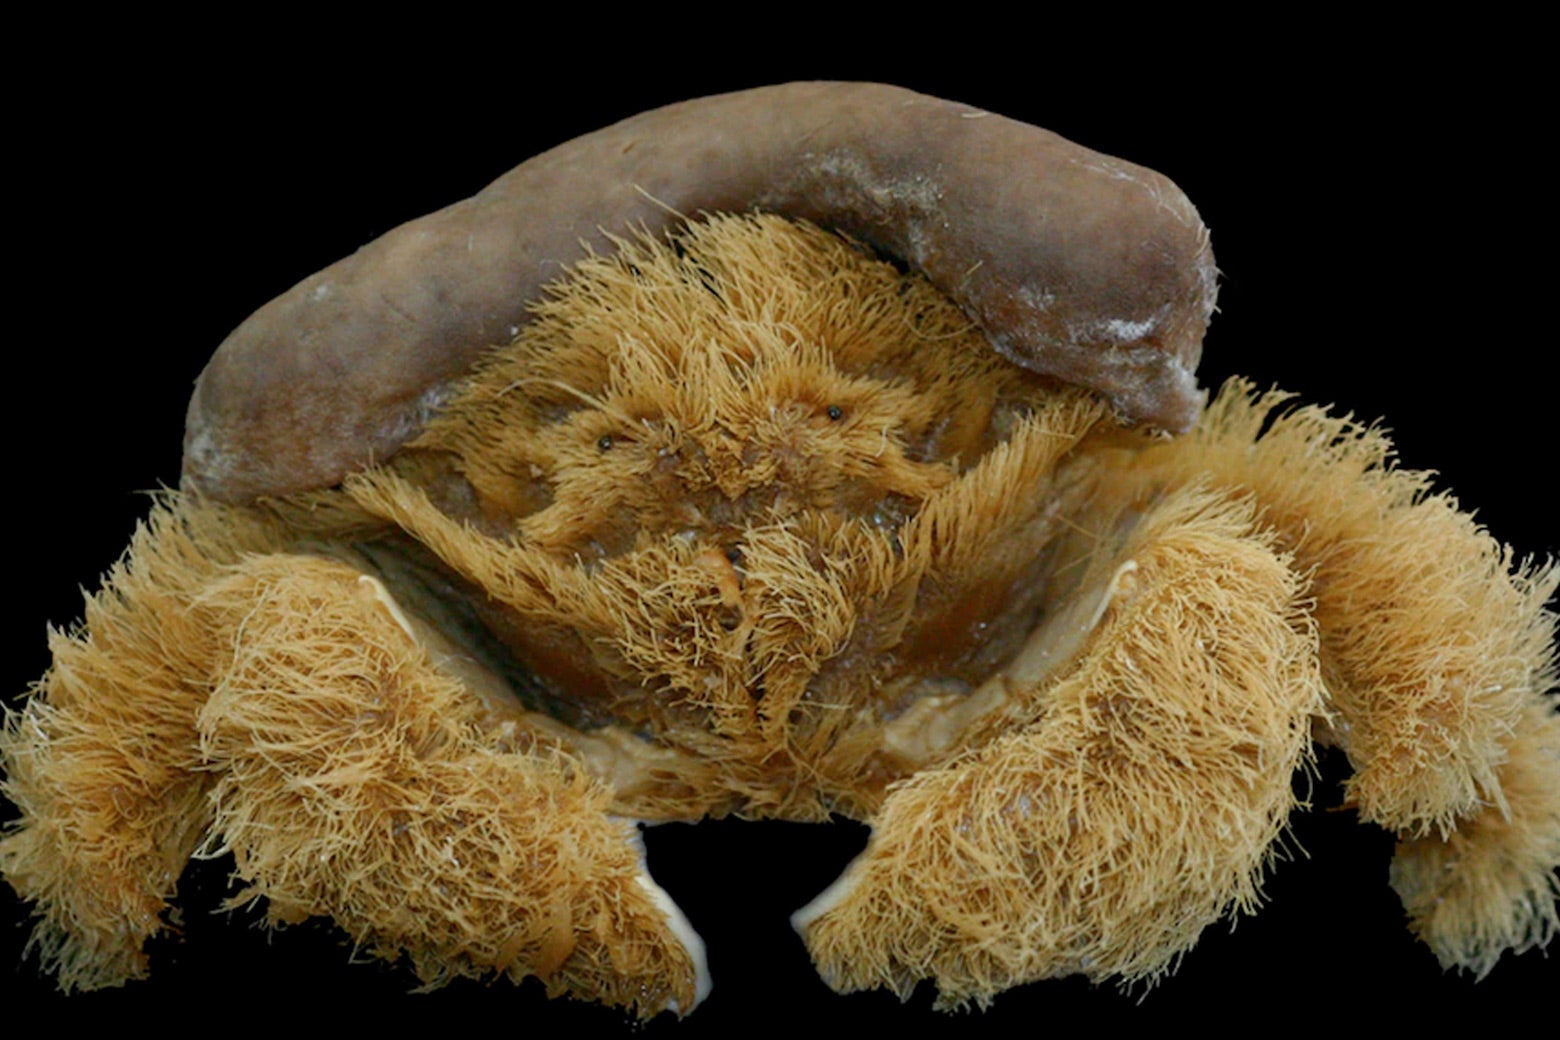 A fluffy crab with a sponge on its head.